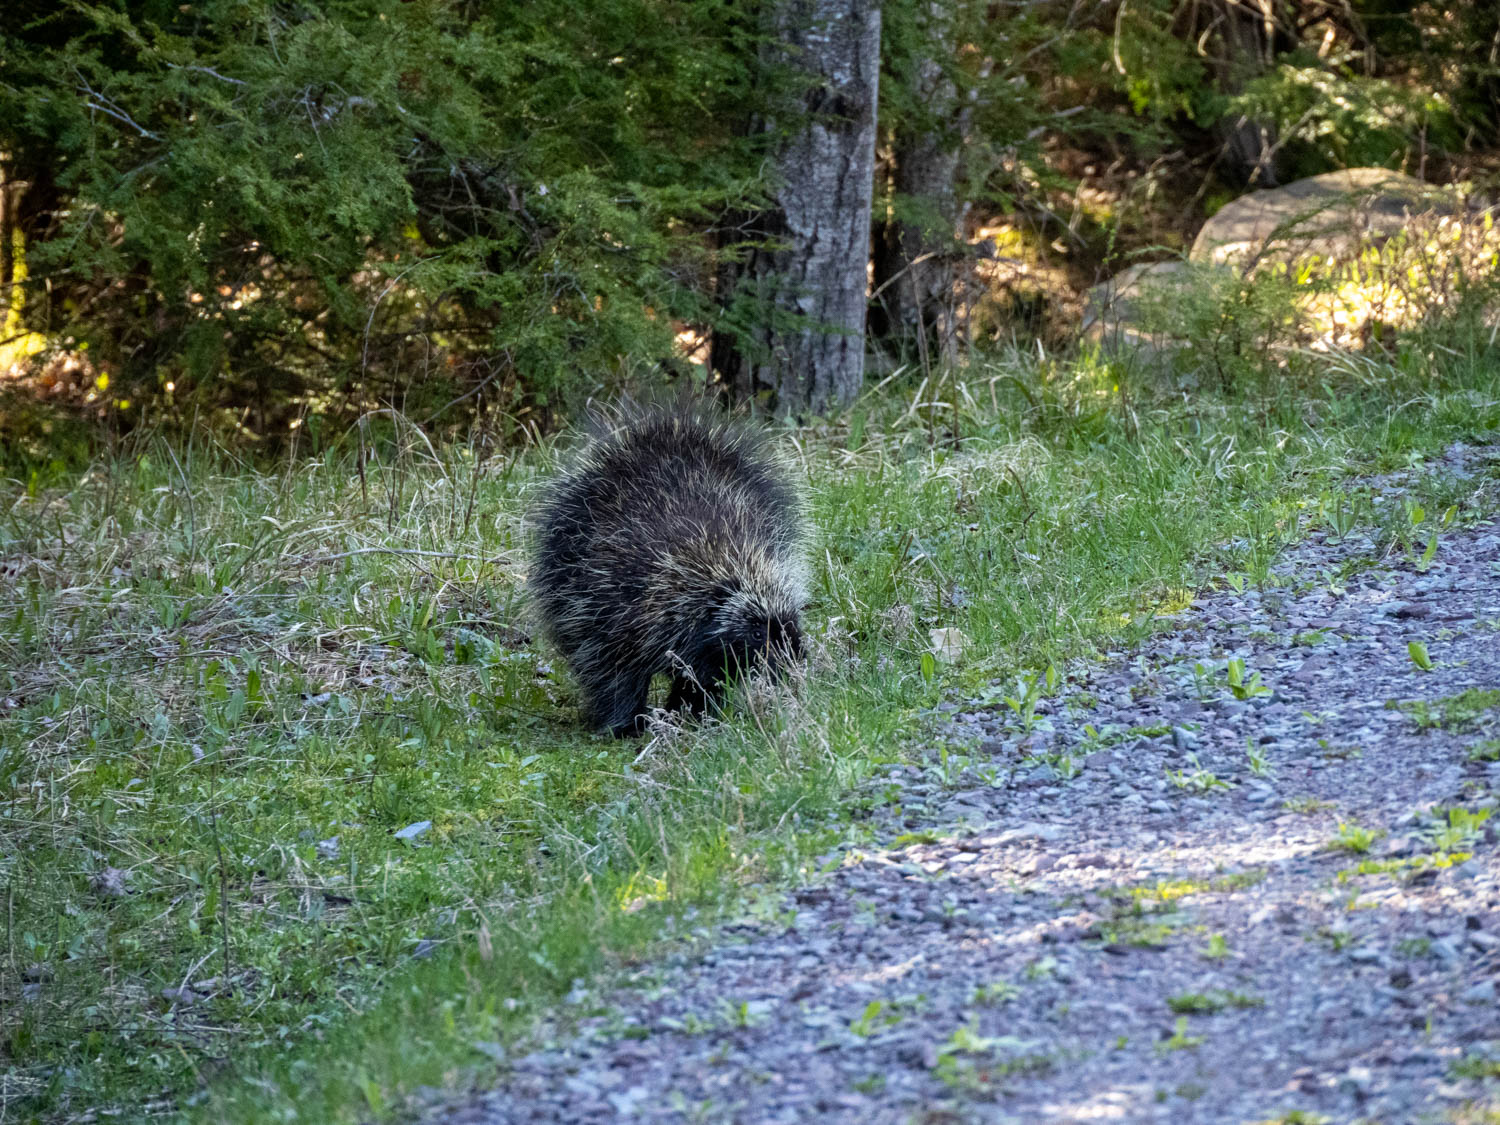 The porcupine, as I first saw 'em, looking for food.